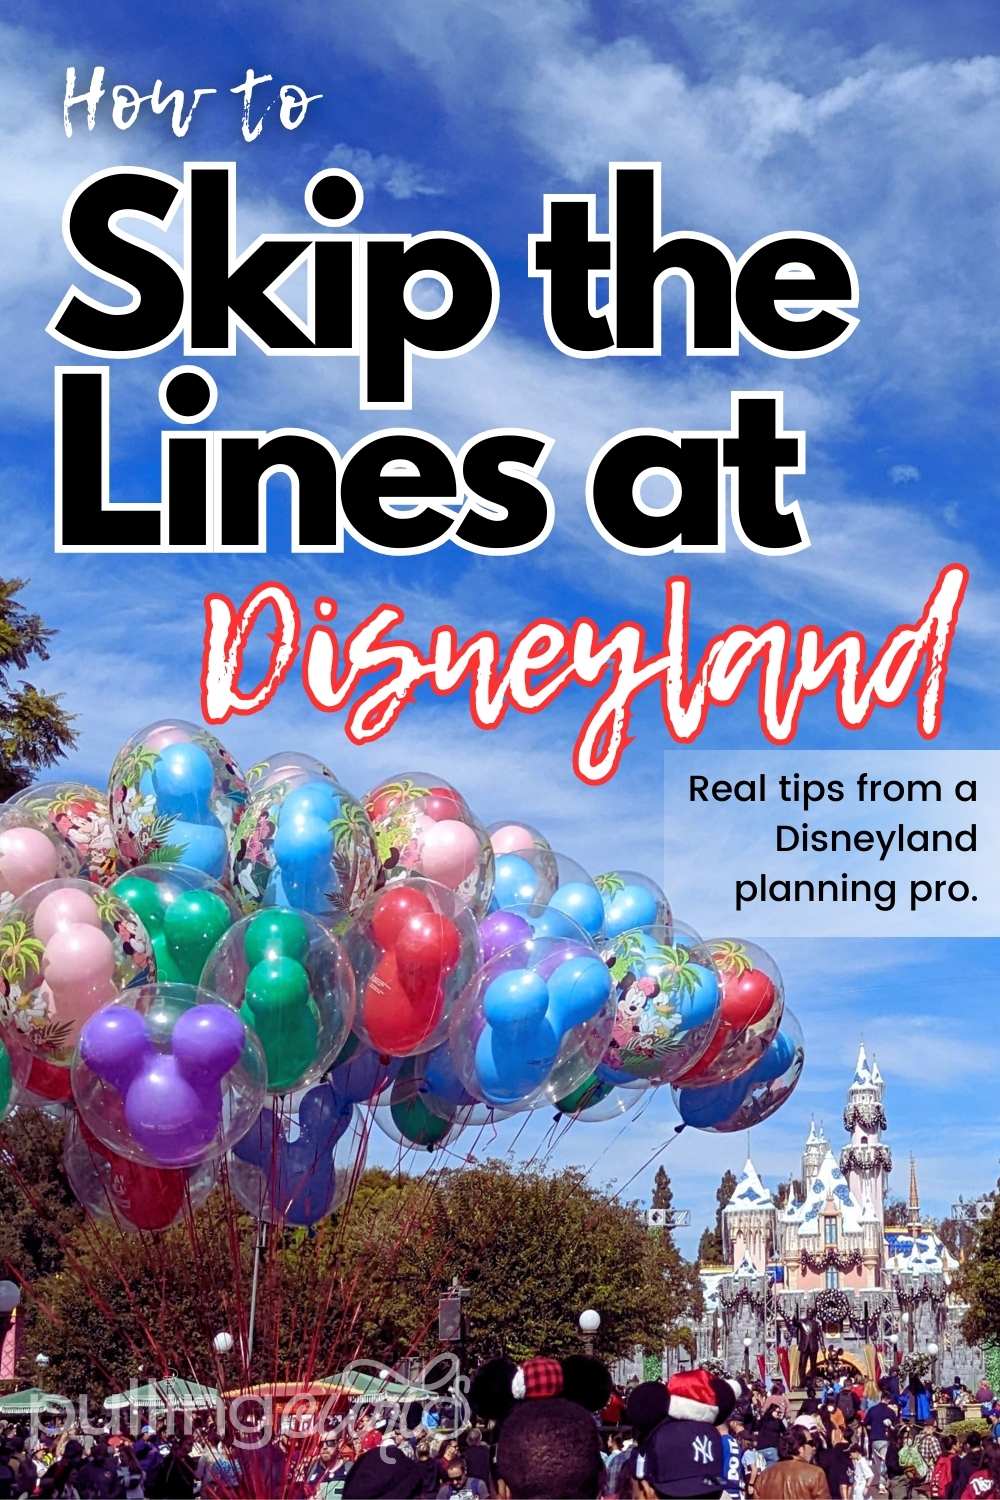 Discover the magic of Disneyland without the wait! 🏰⏰ Uncover the insider guide on how to fast-pass your way through the lines of your favorite rides 🎢💨. Experience more fun, less queue at the Happiest Place on Earth! 🎡🎠 #DisneyHacks via @pullingcurls